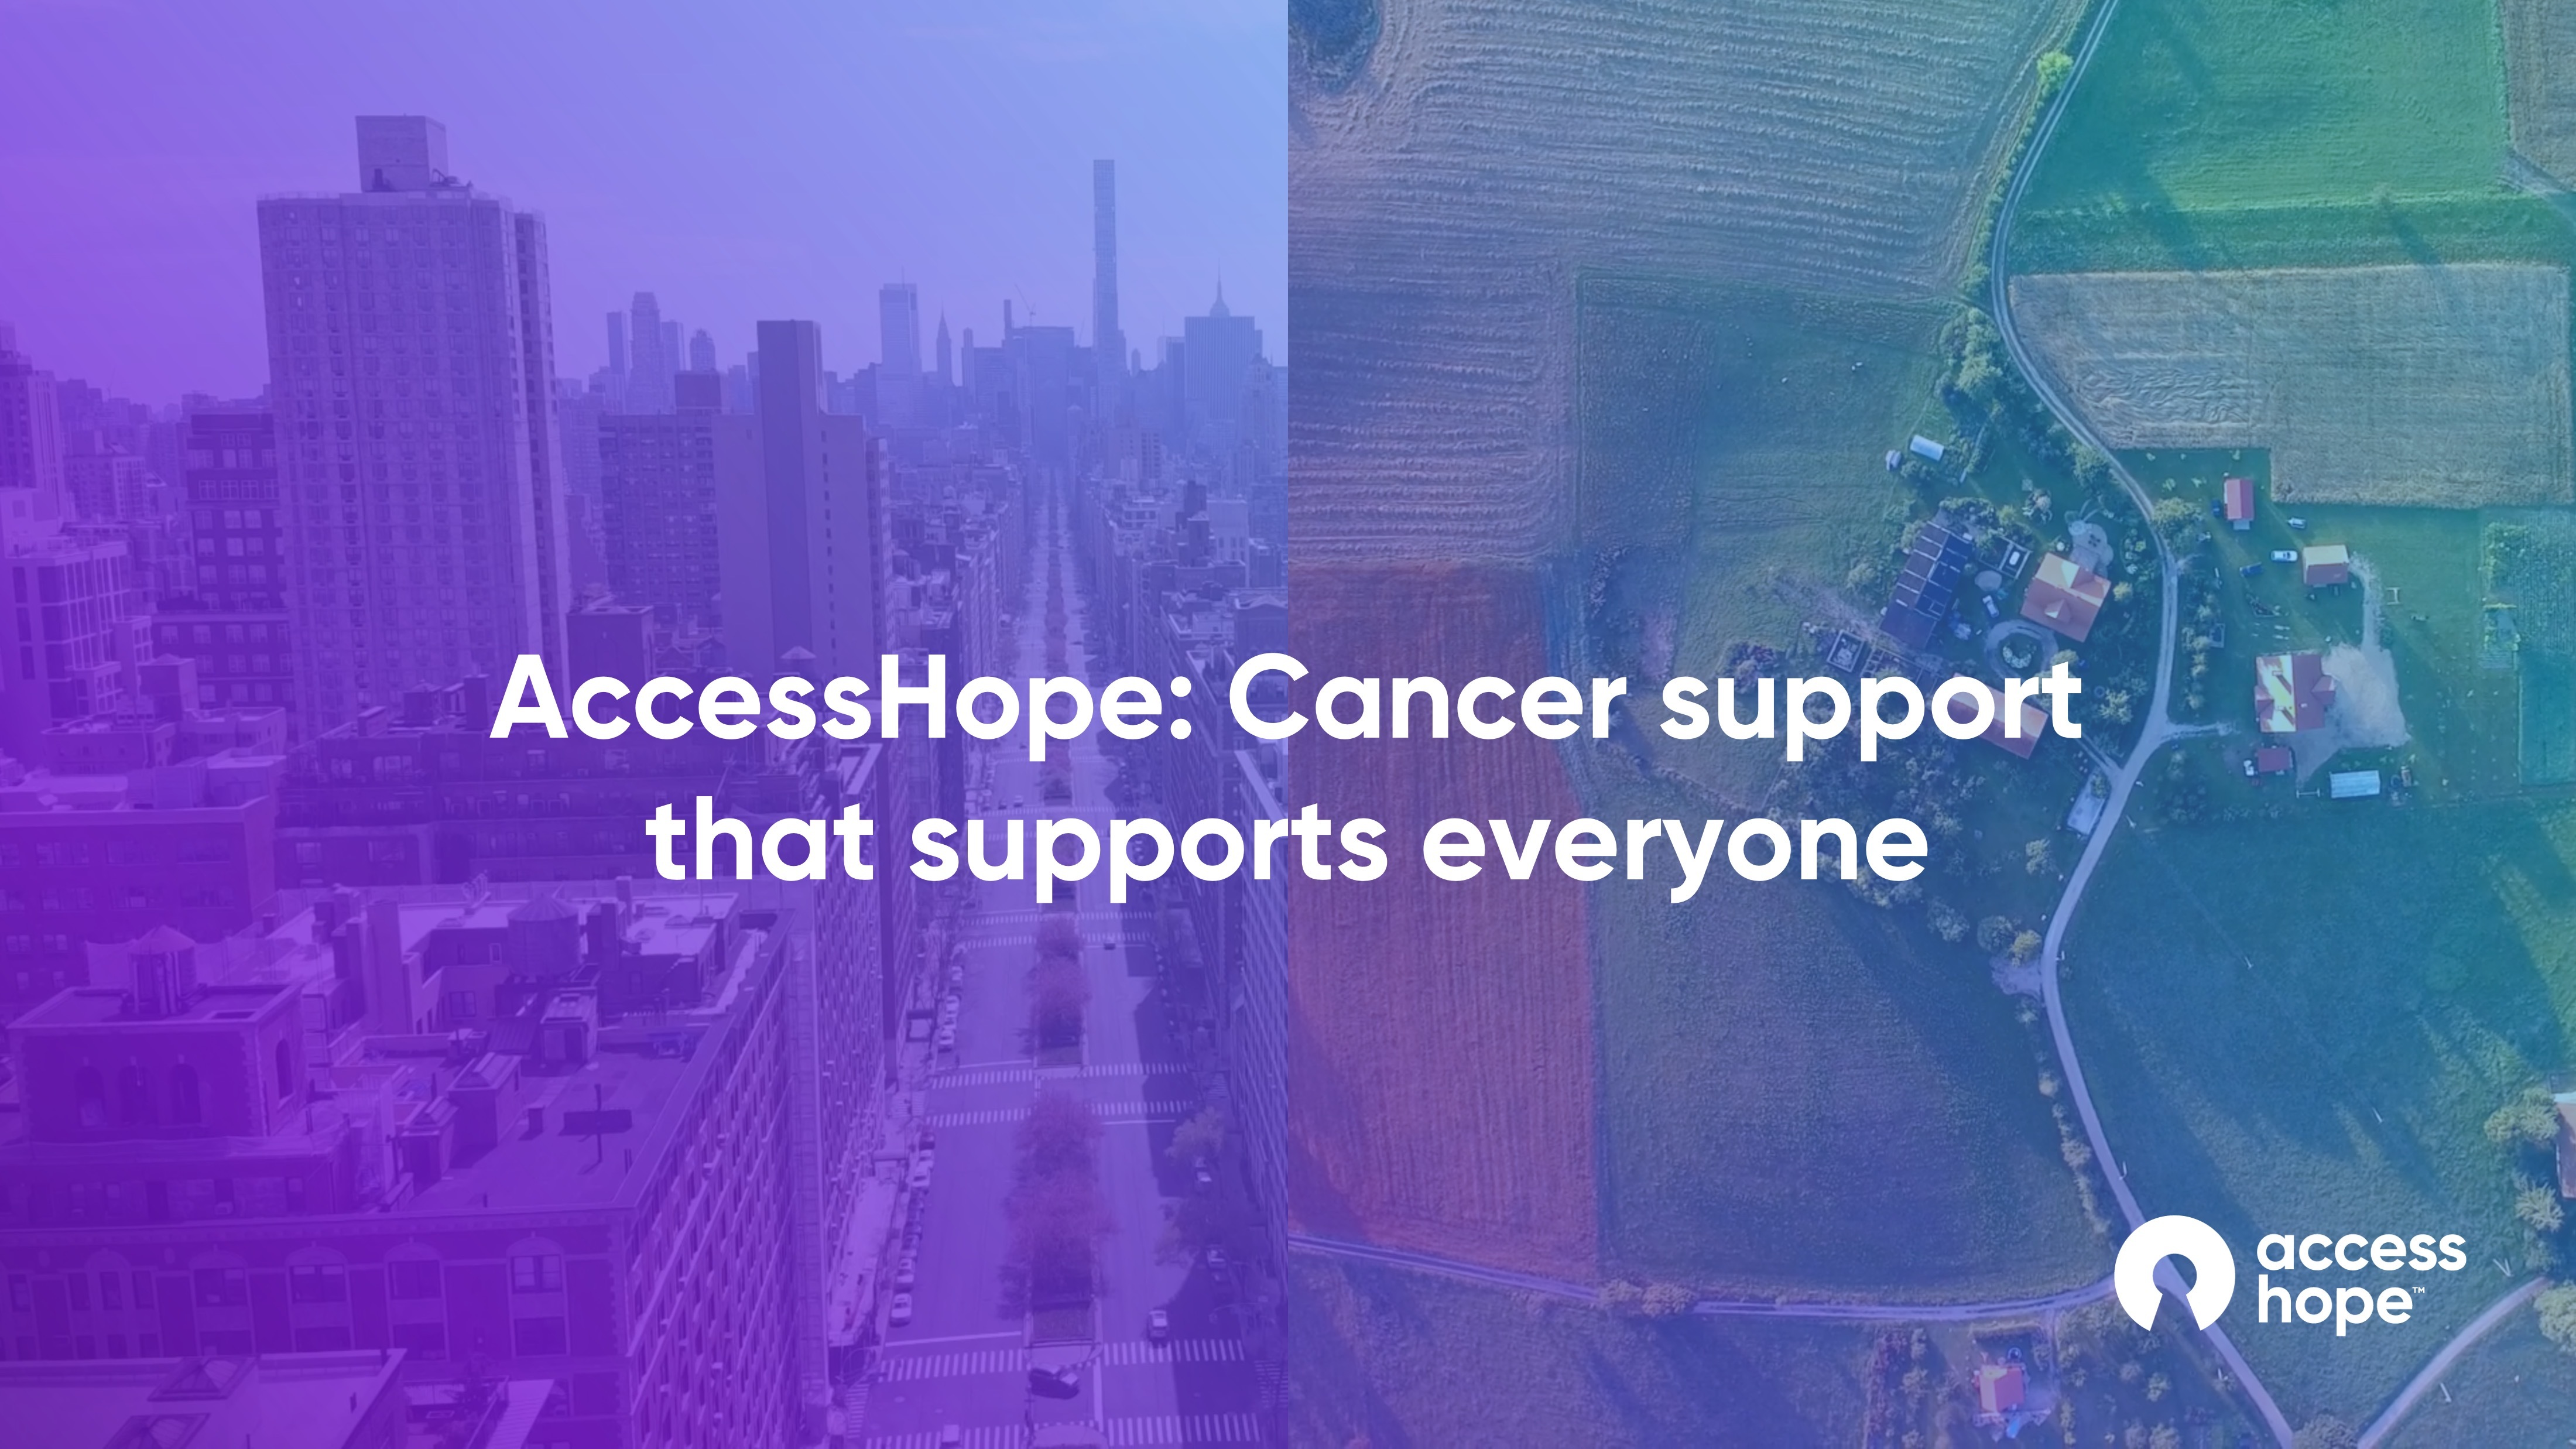 Video open cancer support that supports everyone